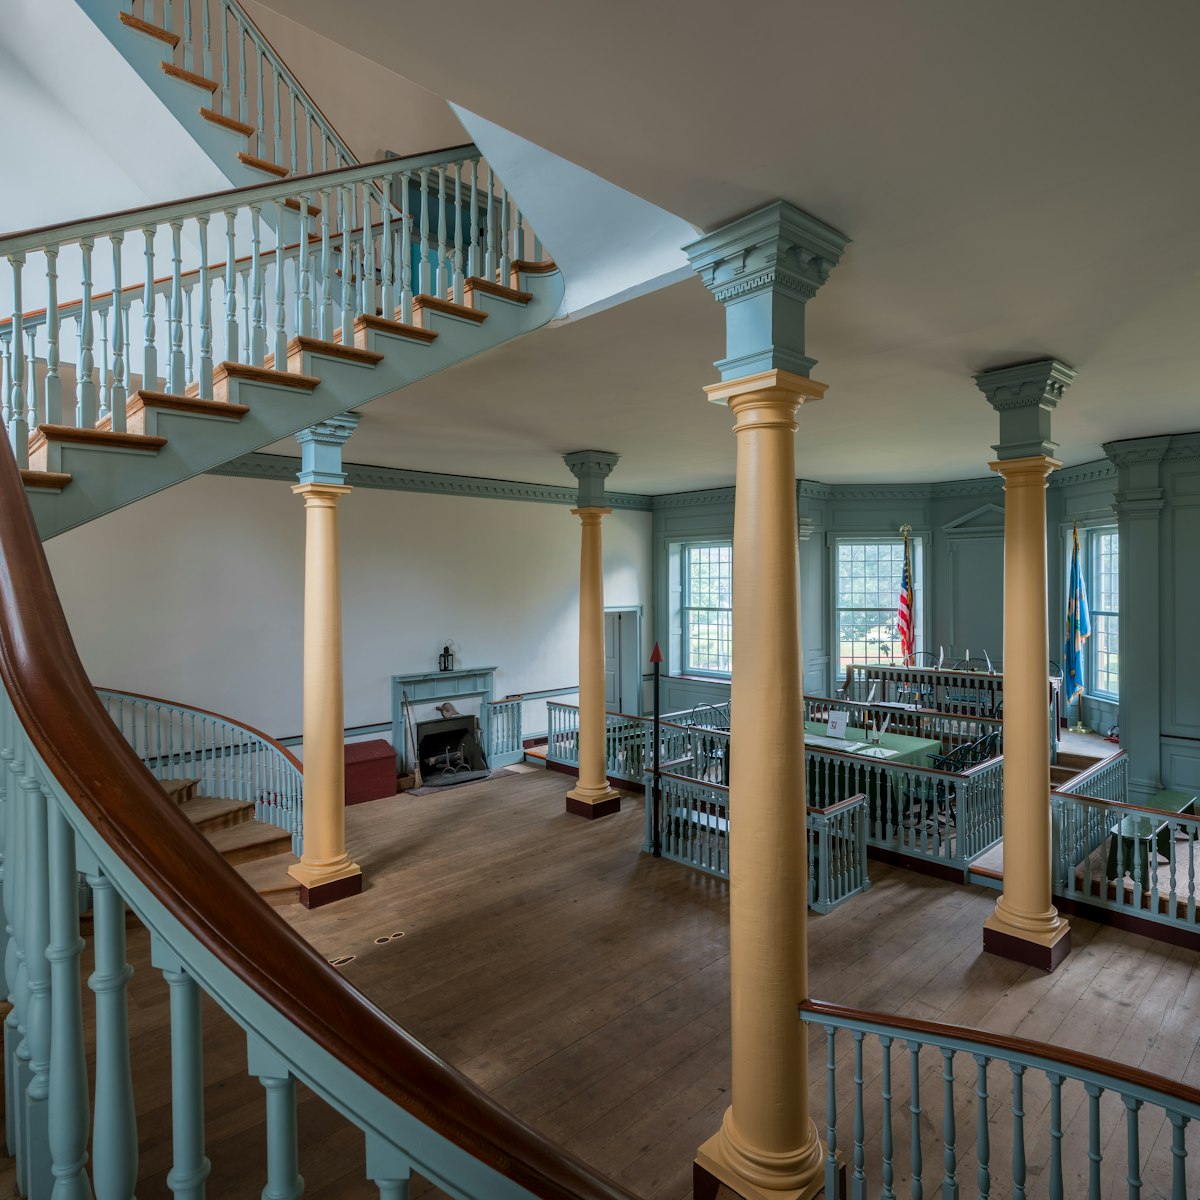 Staircase leading down to the courtroom of the Old State House on The Green in Dover, Delaware.